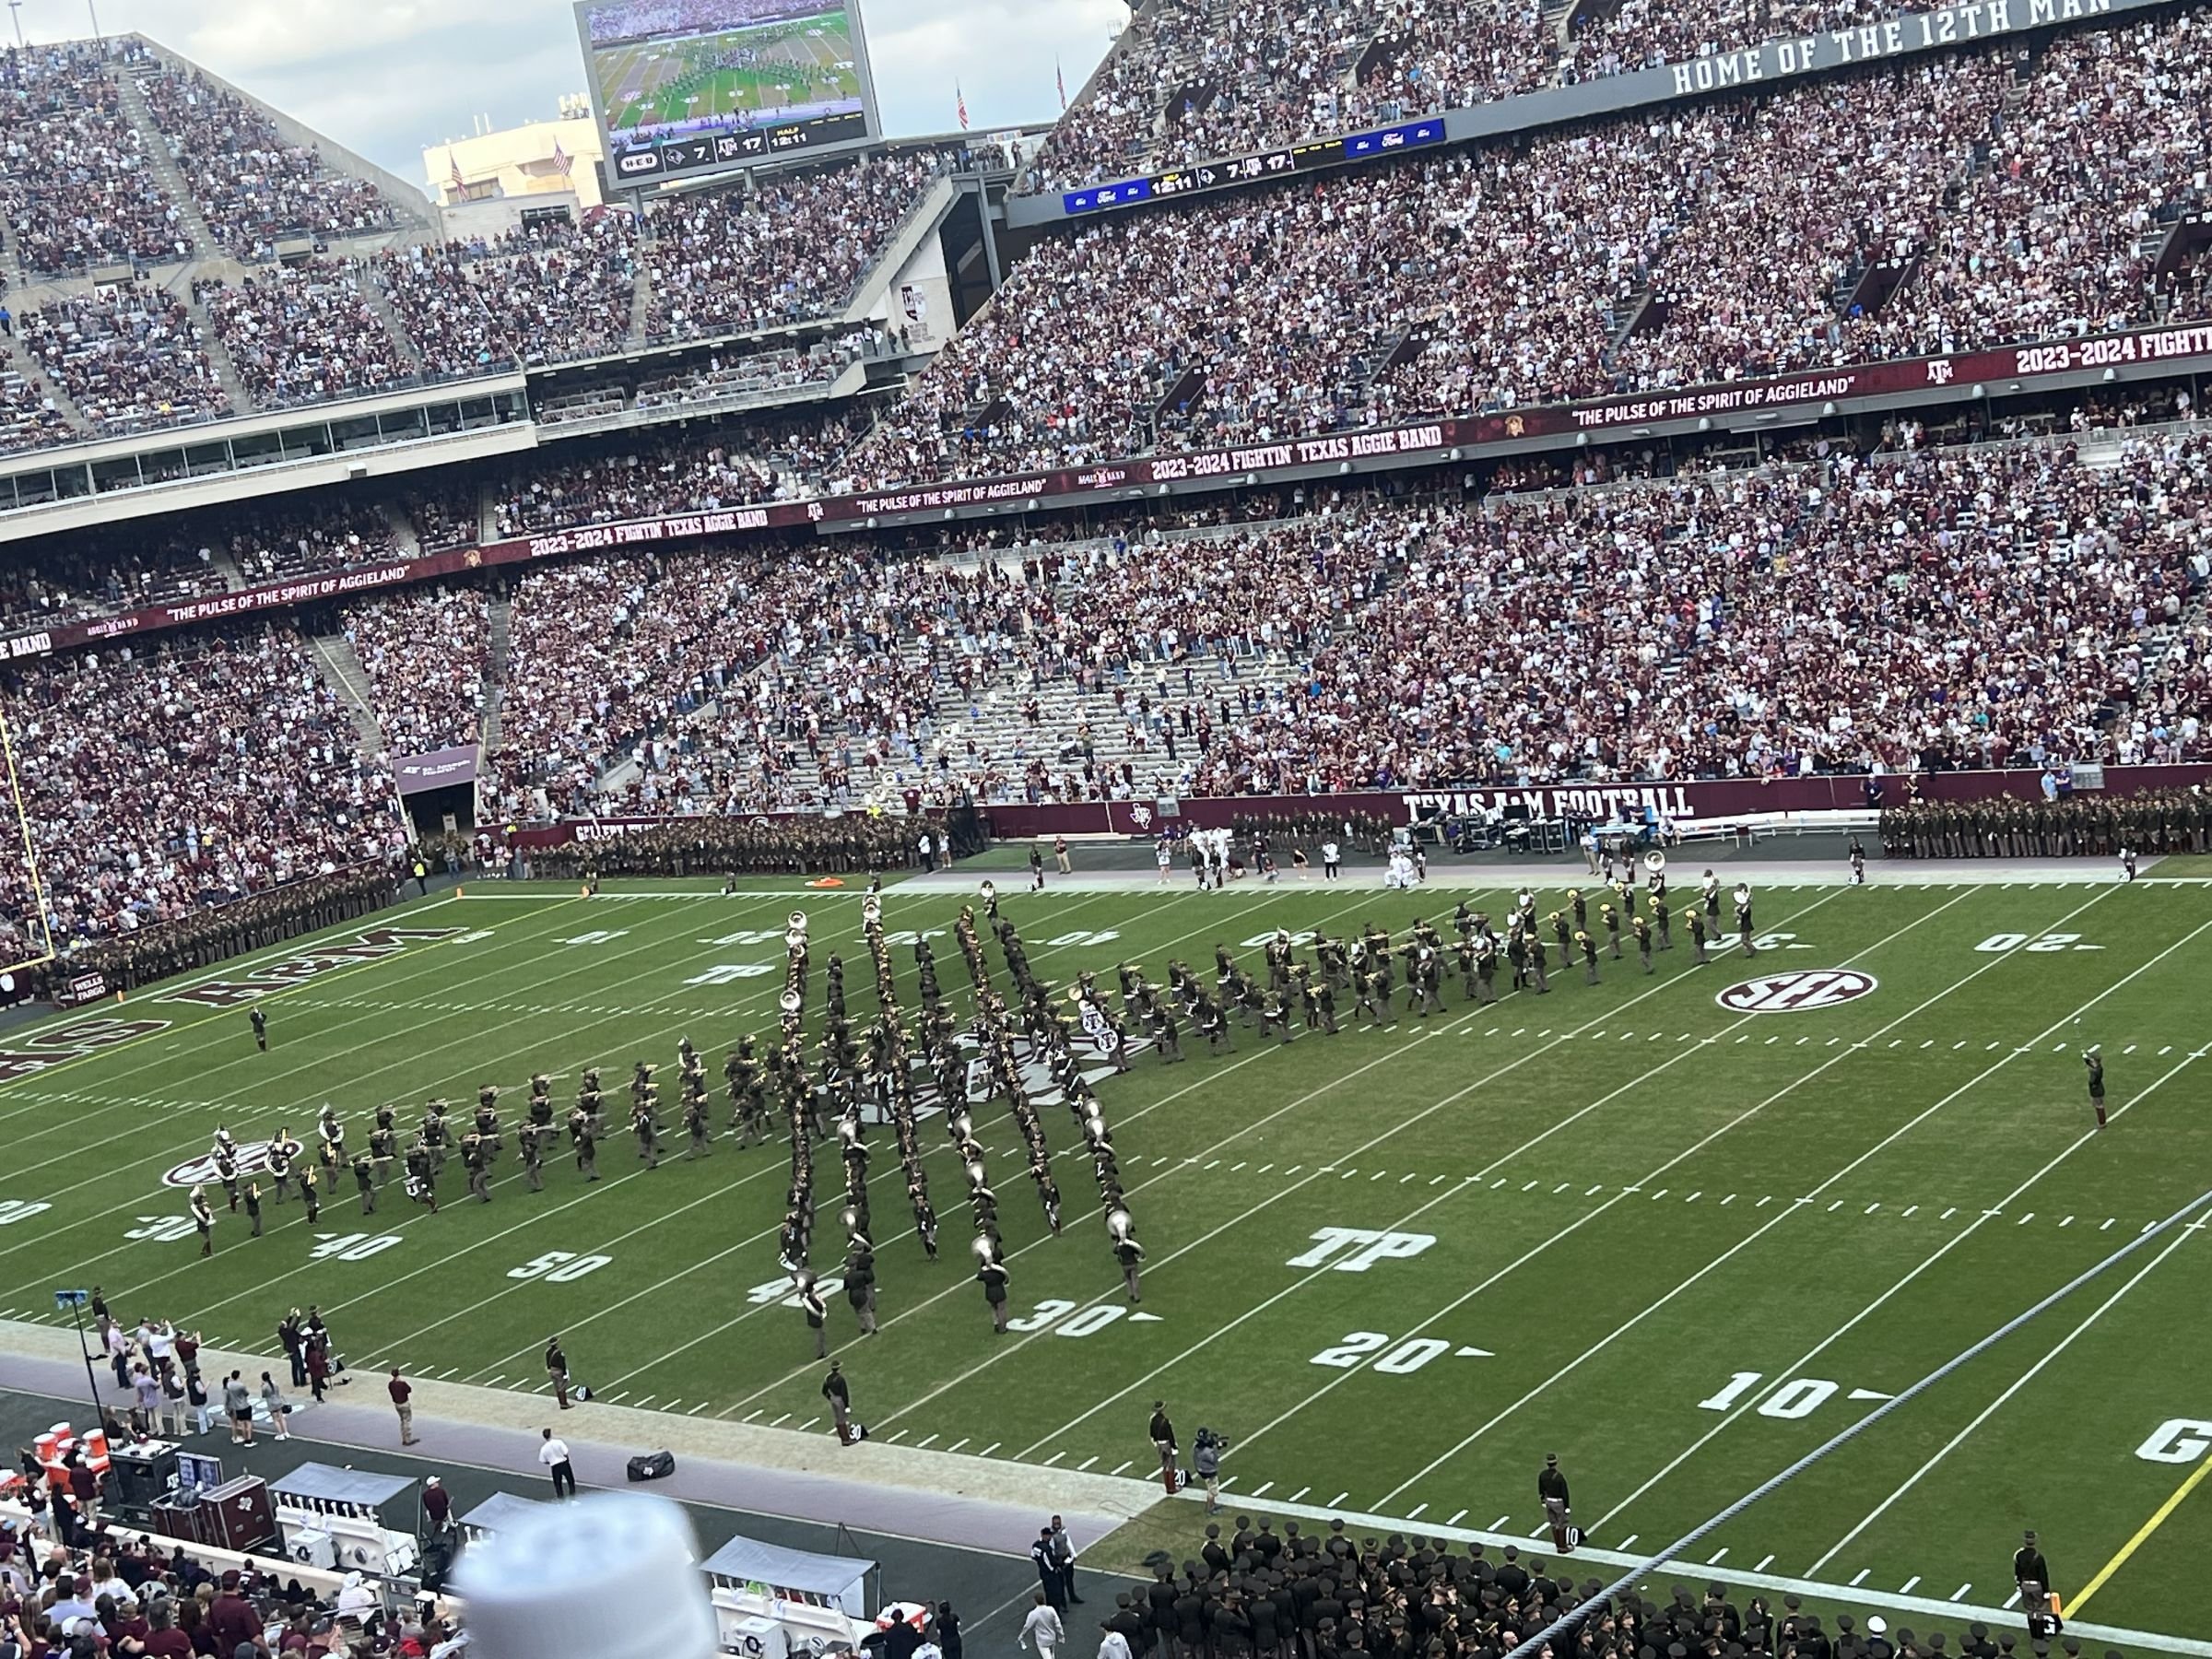 southwest loge, row reserved seat view  - kyle field